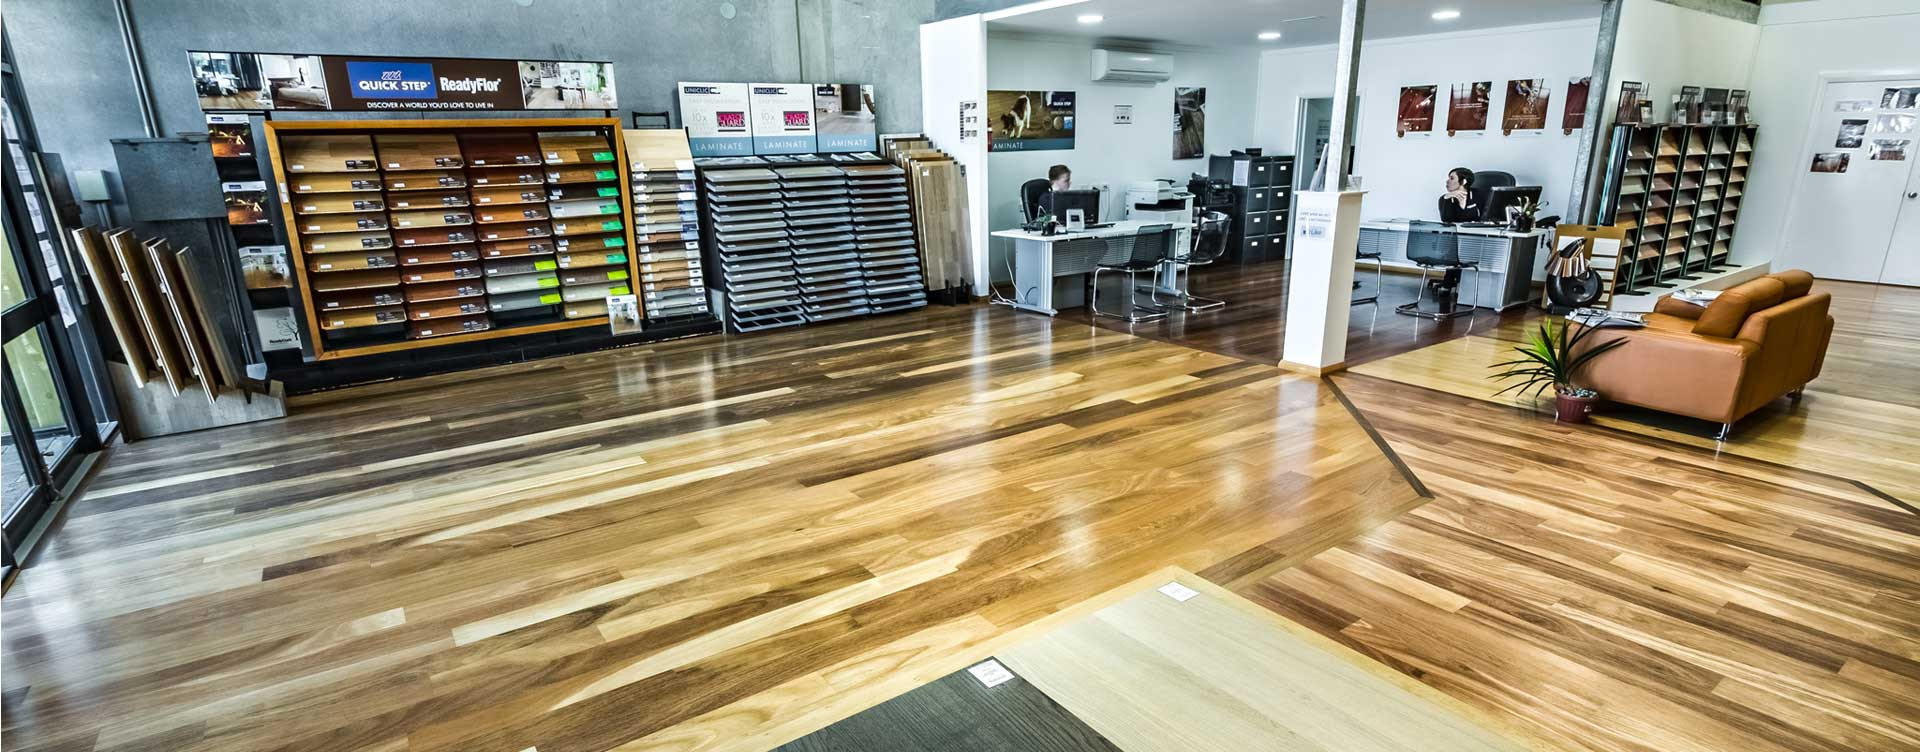 16 Fashionable Hardwood Flooring Outlet Near Me 2023 free download hardwood flooring outlet near me of timber flooring perth coastal flooring wa quality wooden with thats why they call us the home of fine wood floors